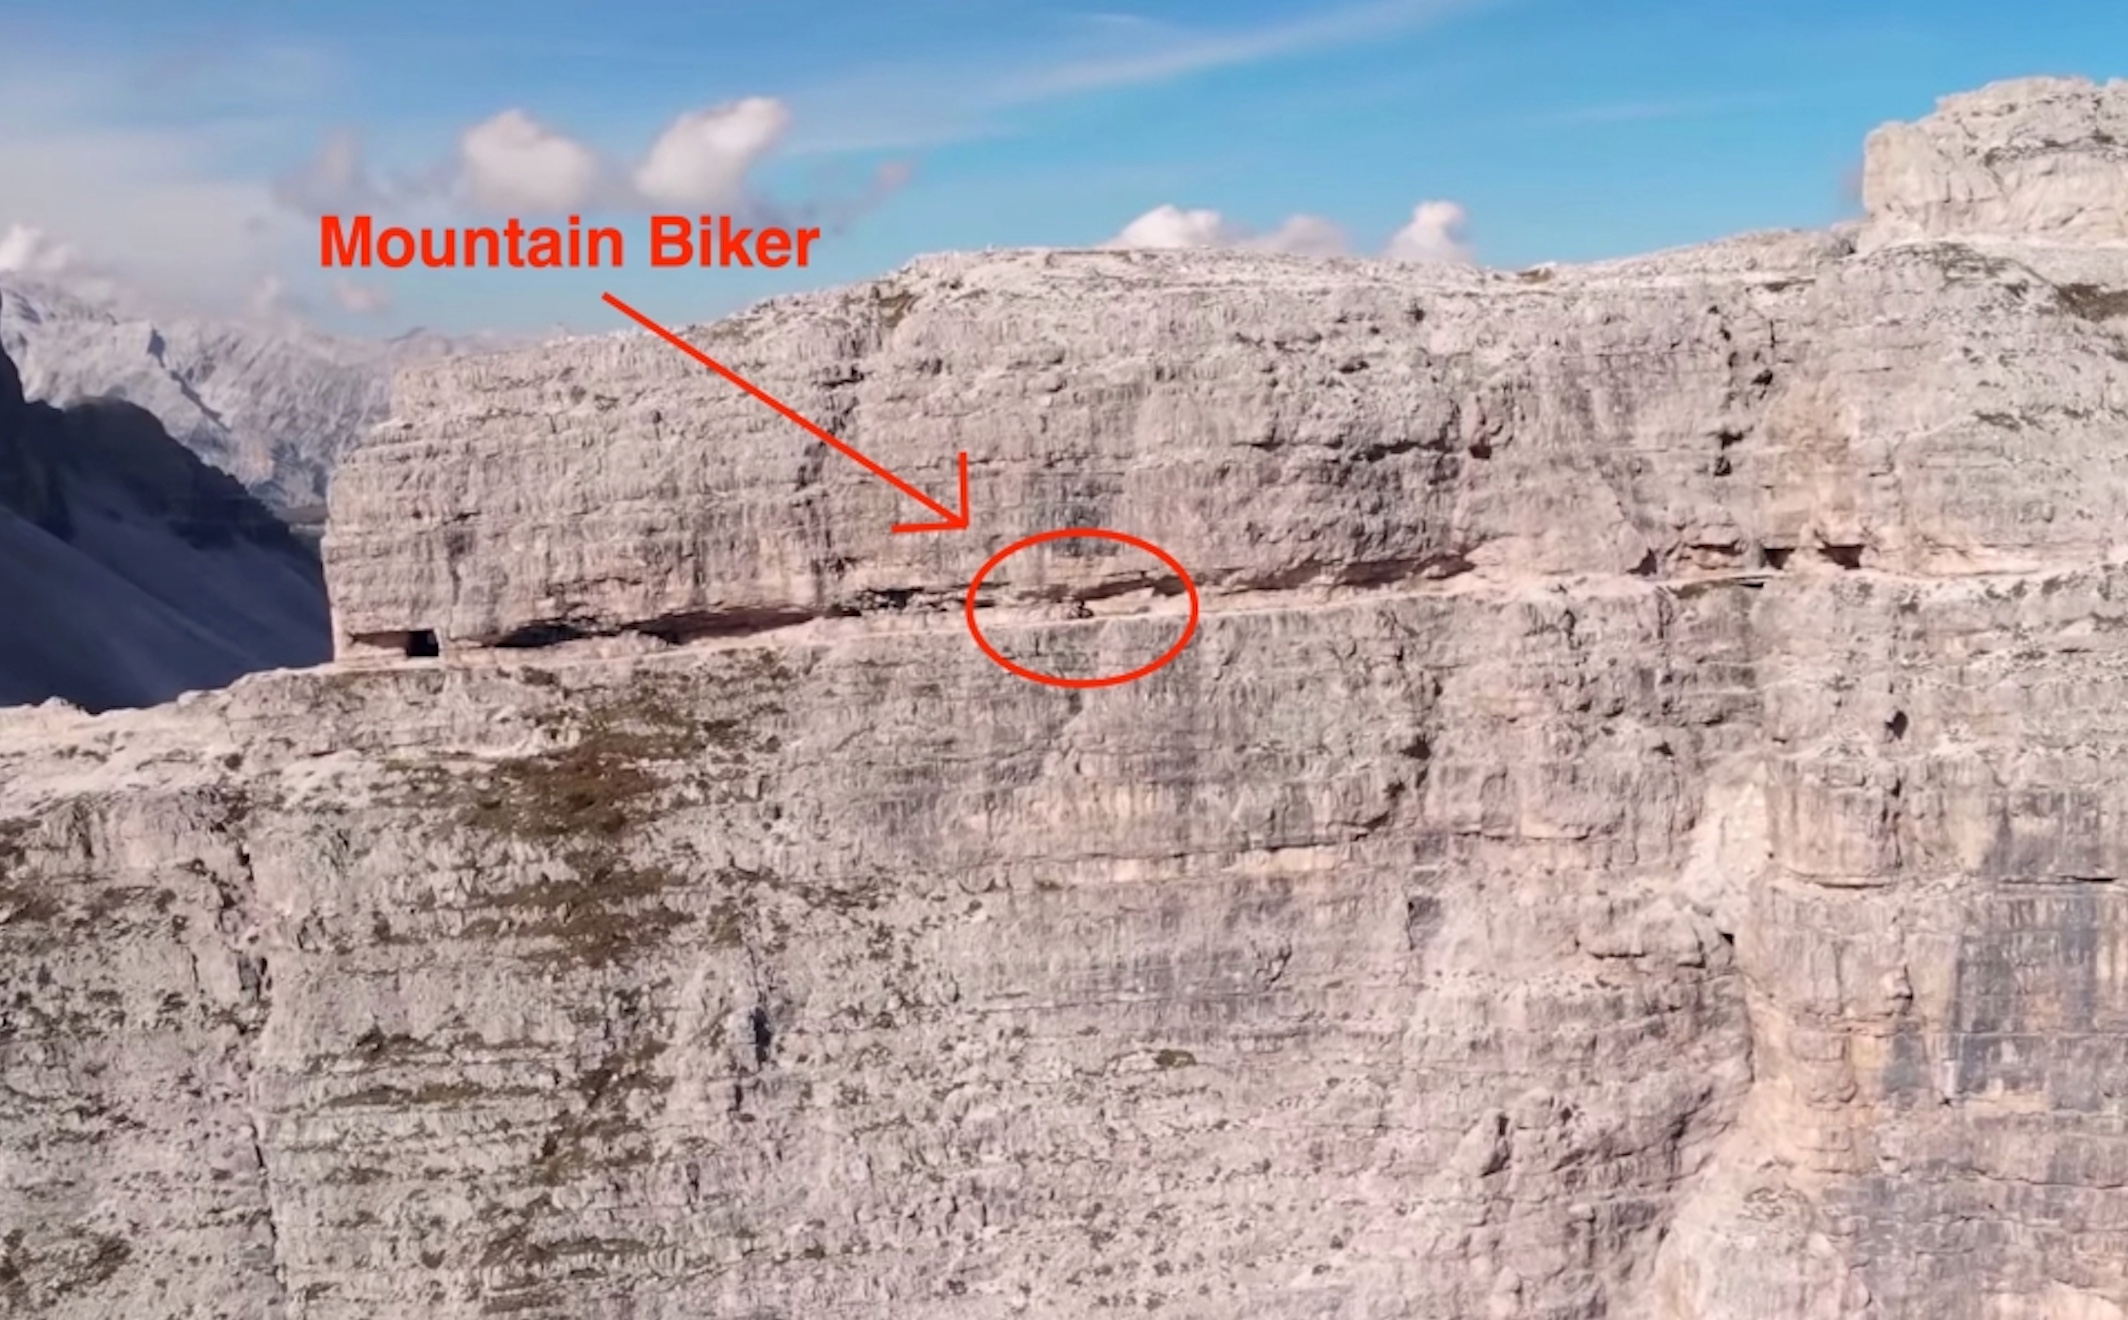 Hikers Are Usually Harnessed Here...This Mountain Biker Clearly Is Not